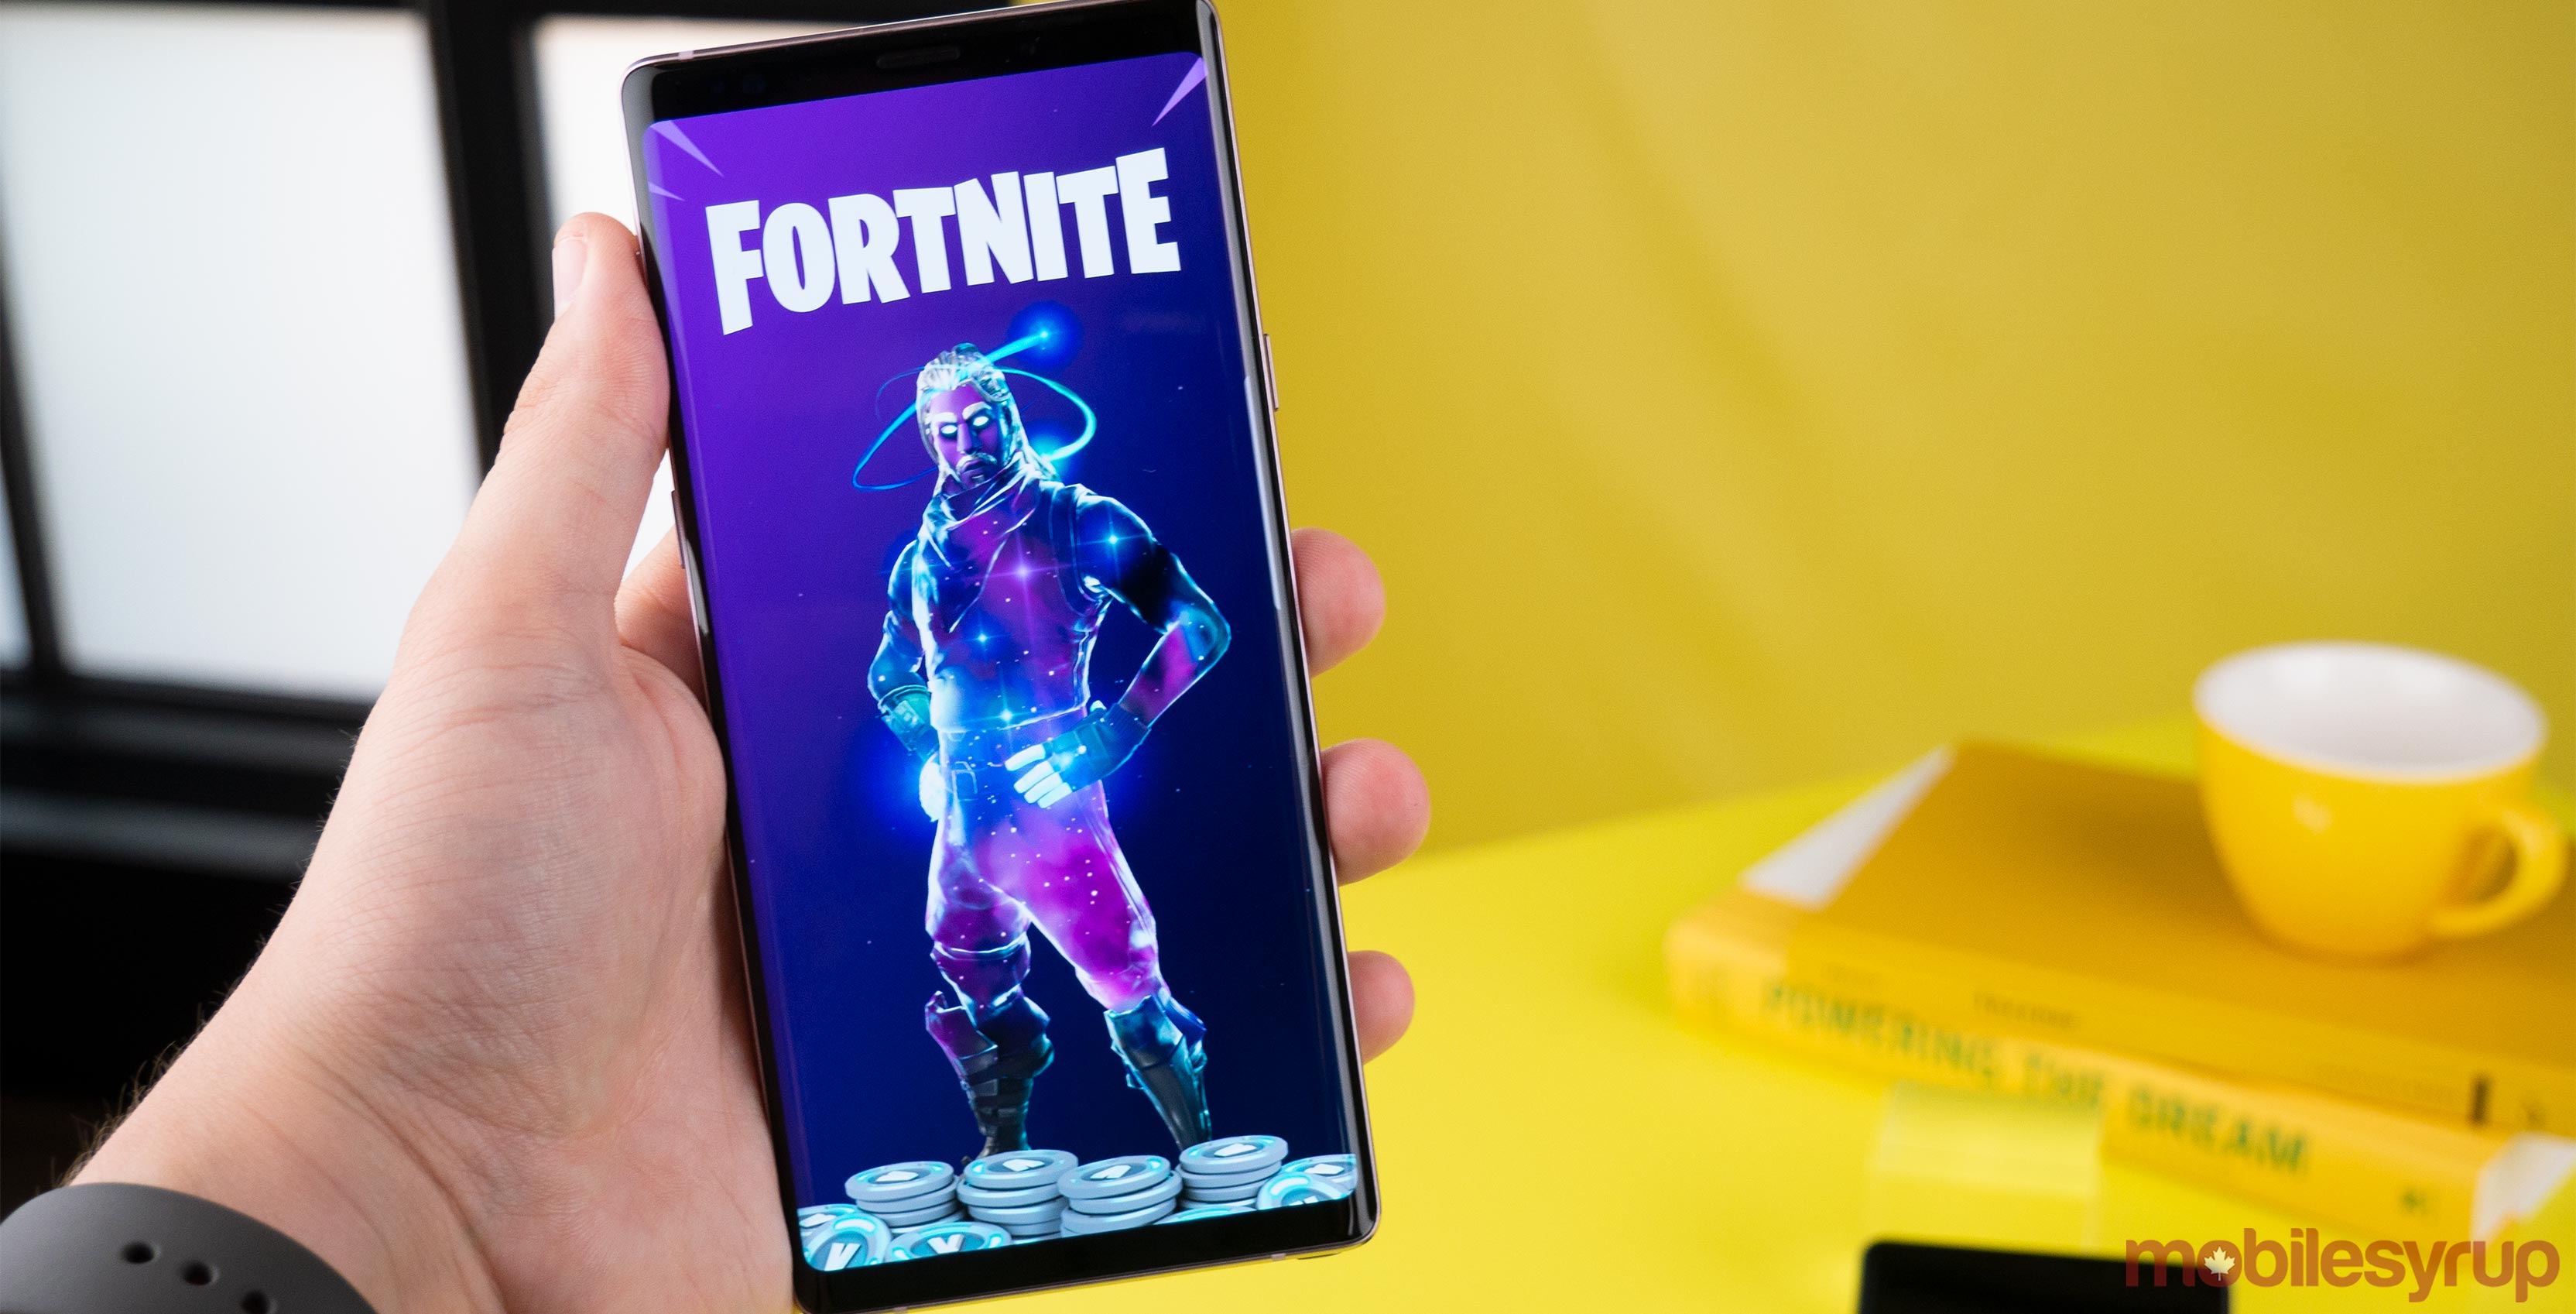 fortnite s long awaited android version has finally launched on samsung mobile devices in beta samsung announced at its unpacked note 9 event in new york - has fortnite come out on android